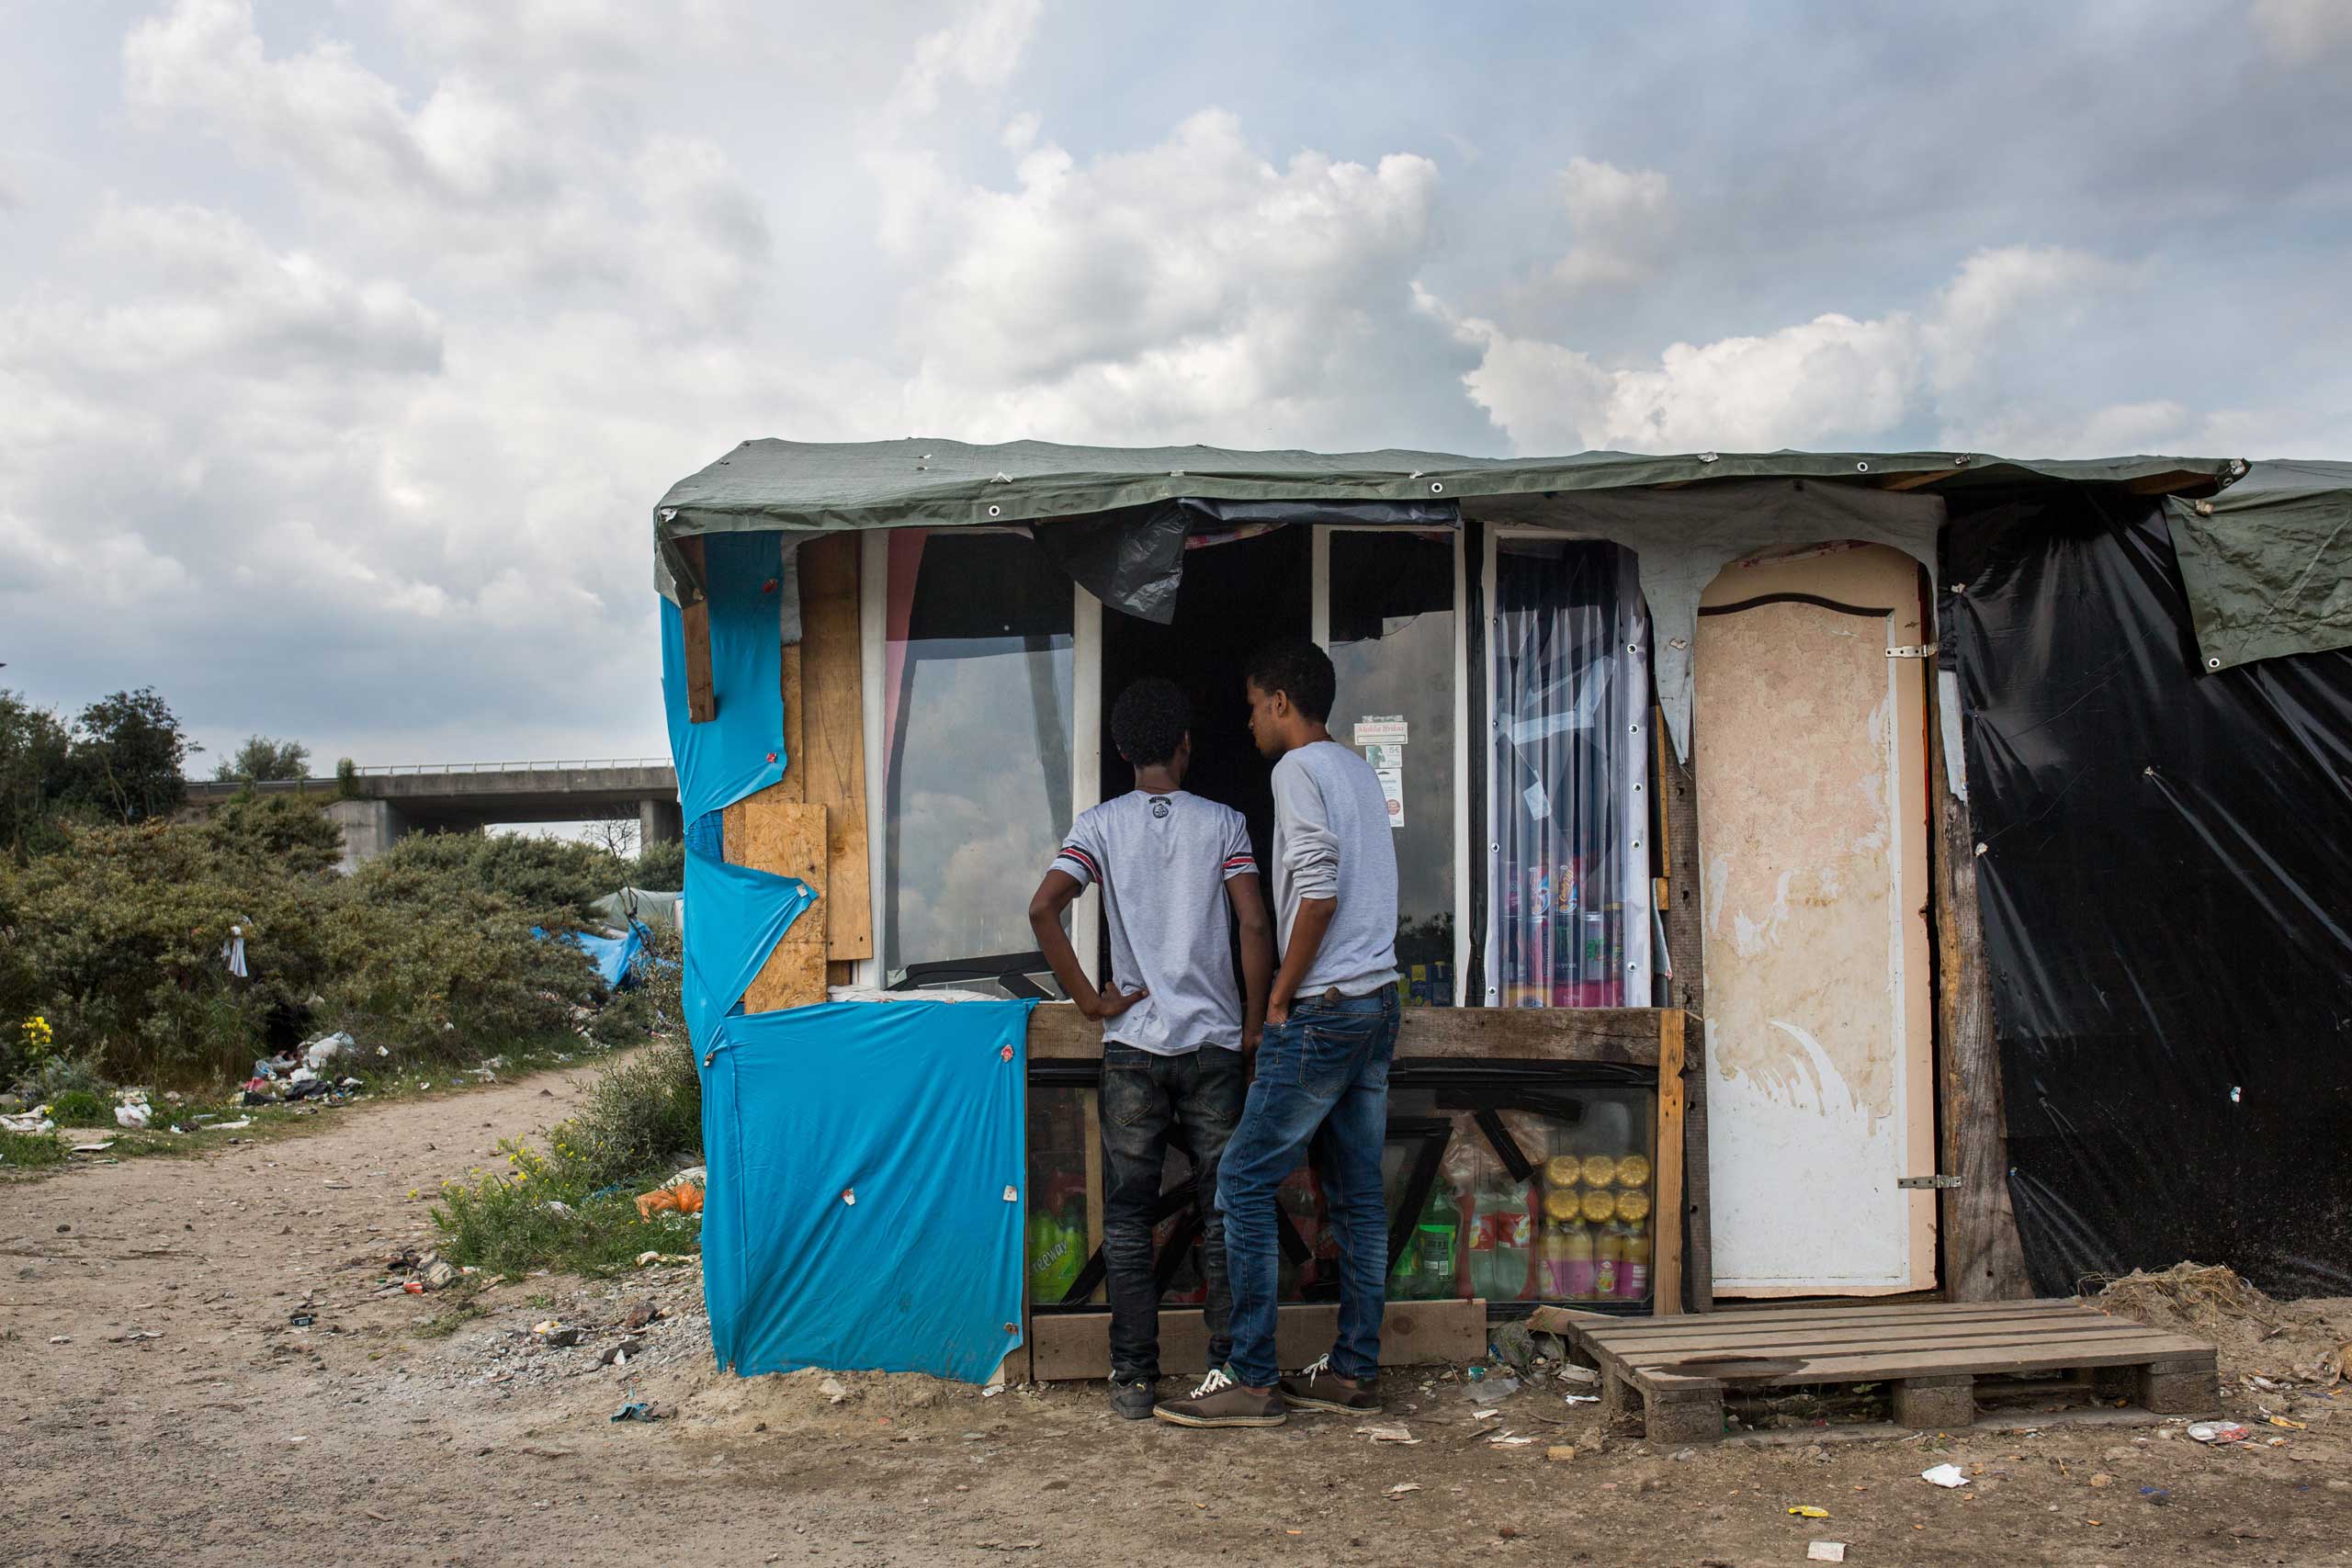 Men buy from a shop run by Afghans at a make shift camp near the port of Calais in Calais, France, on July 31, 2015. (Rob Stothard—Getty Images)